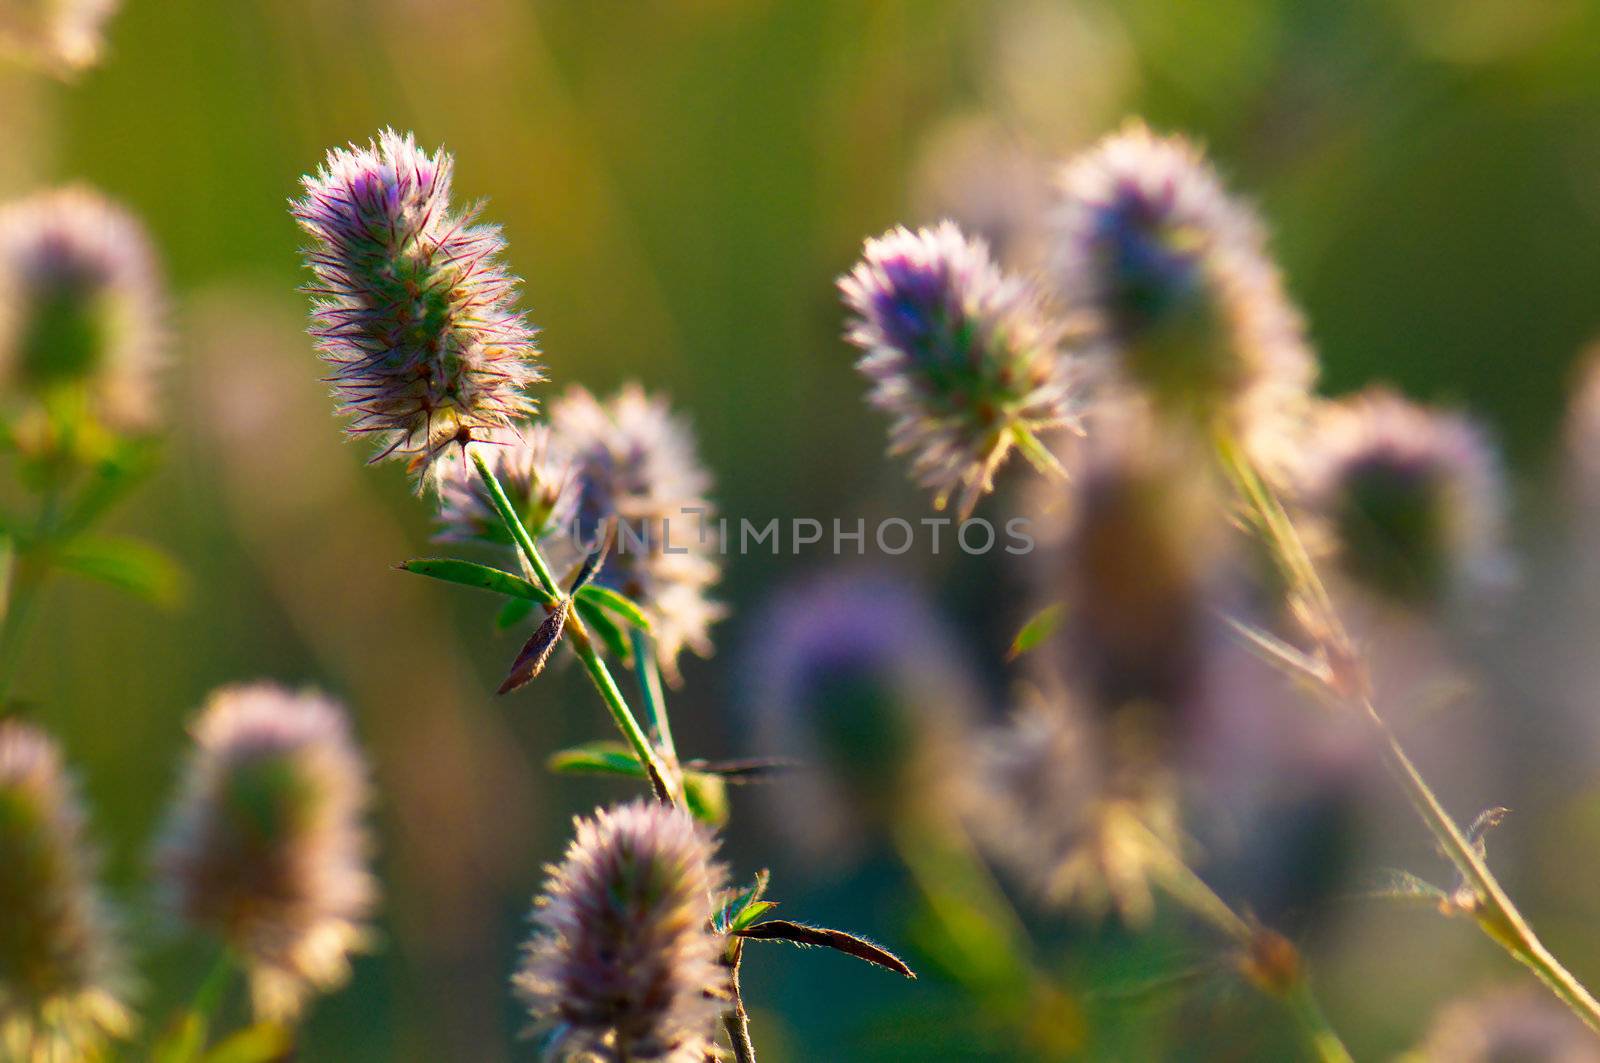 Wild flowers in a meadow at sunset